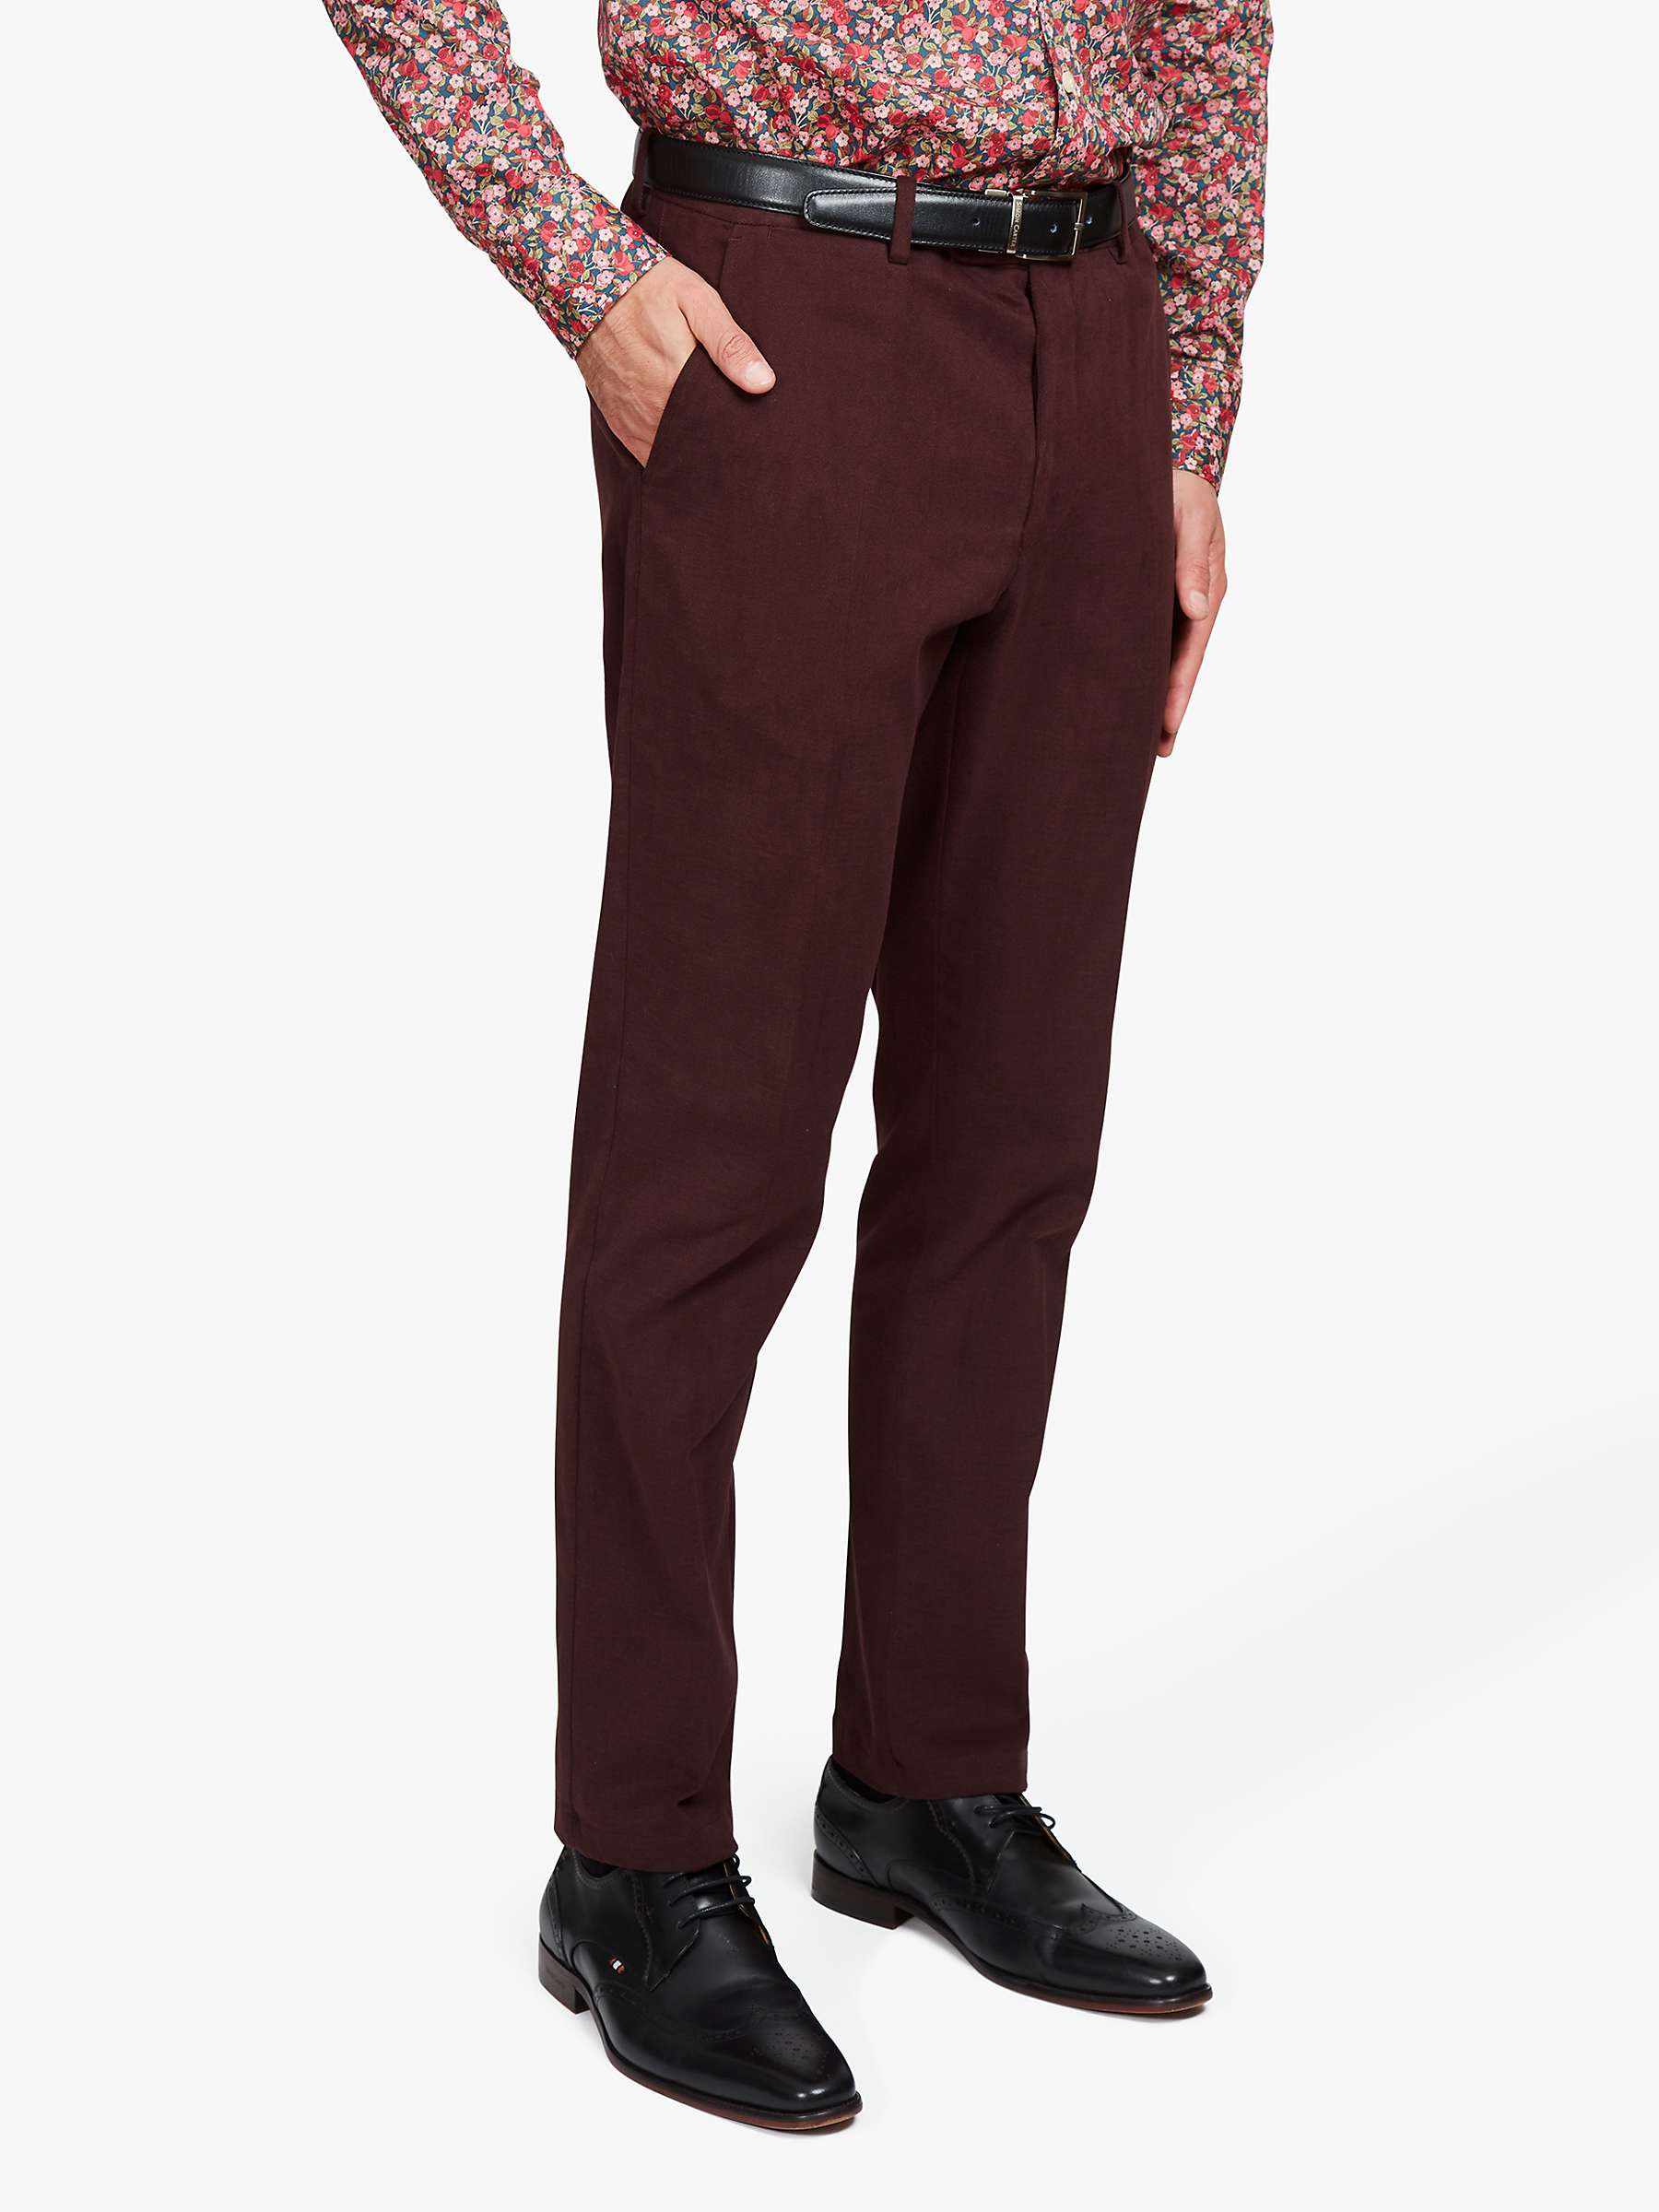 Buy Simon Carter Brushed Cotton Trousers Online at johnlewis.com